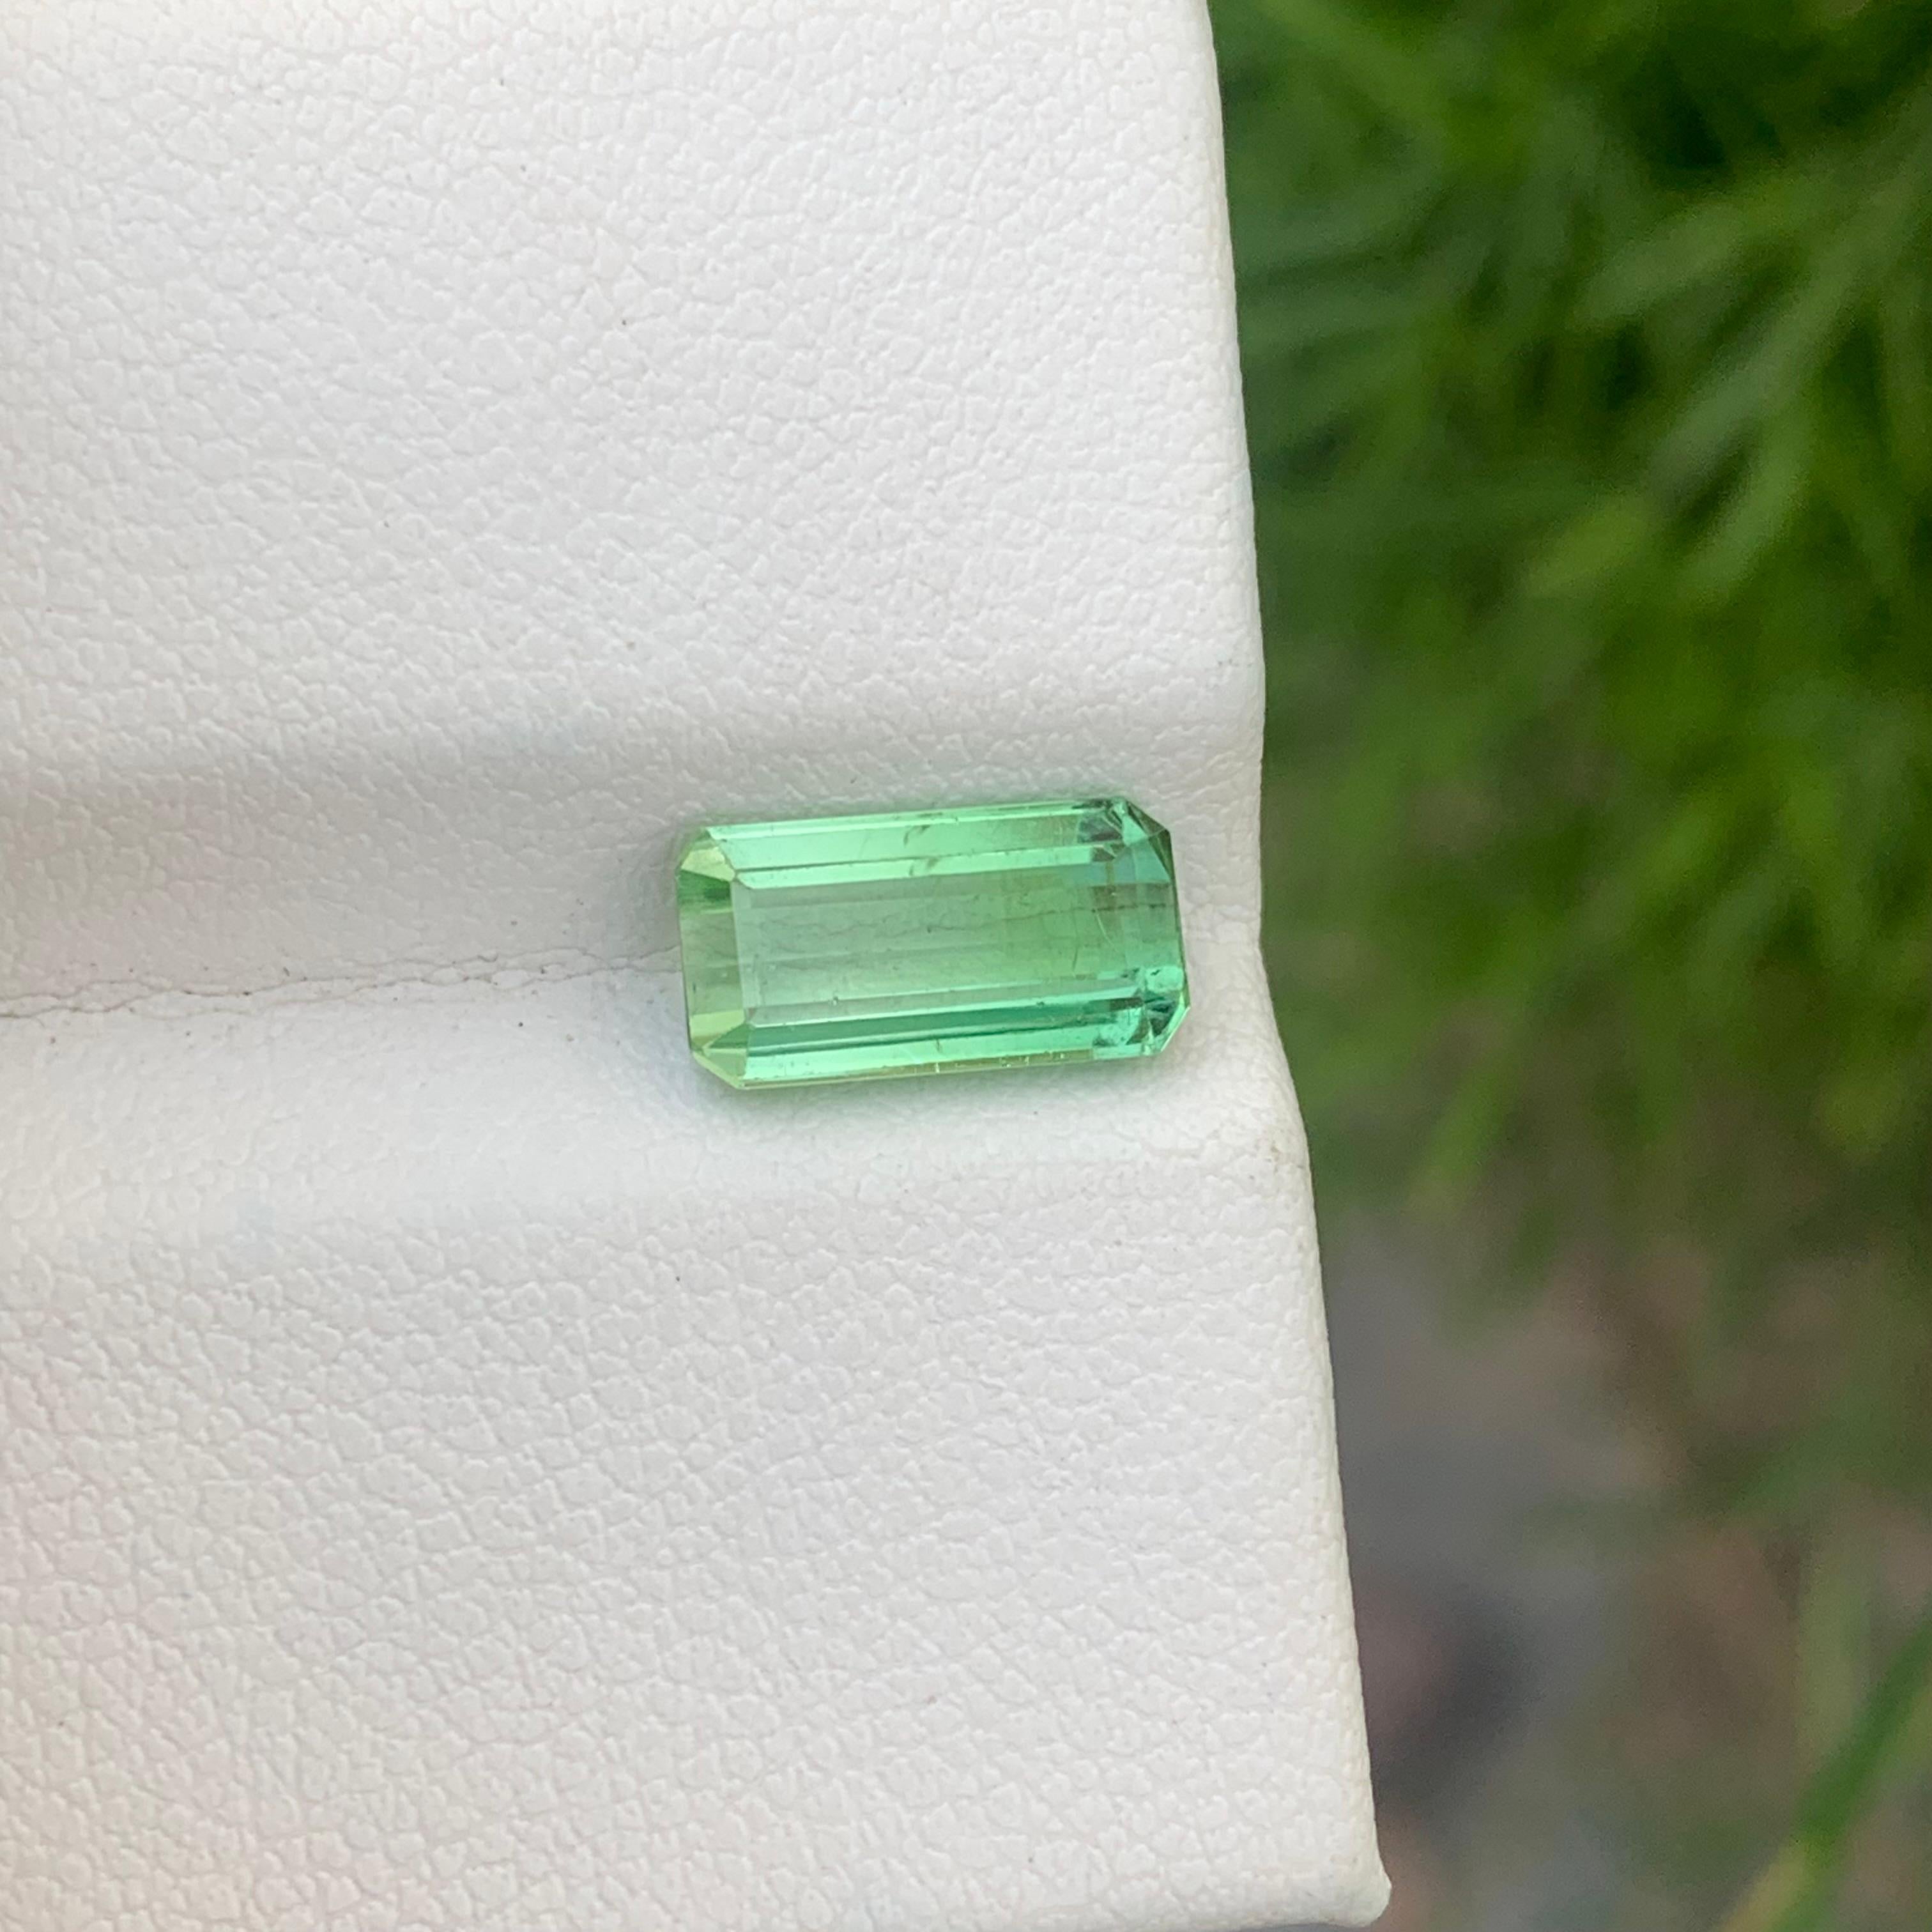 Loose Mint Green Tourmaline
Weight: 2.35 Carats
Dimension: 10.6 x 5.6 x 4 Mm
Colour : Mint Green
Origin: Afghanistan
Shape: Emerald
Certificate: On Demand
Treatment: Non

Mint tourmaline, a delicate and soothing variety within the tourmaline family,